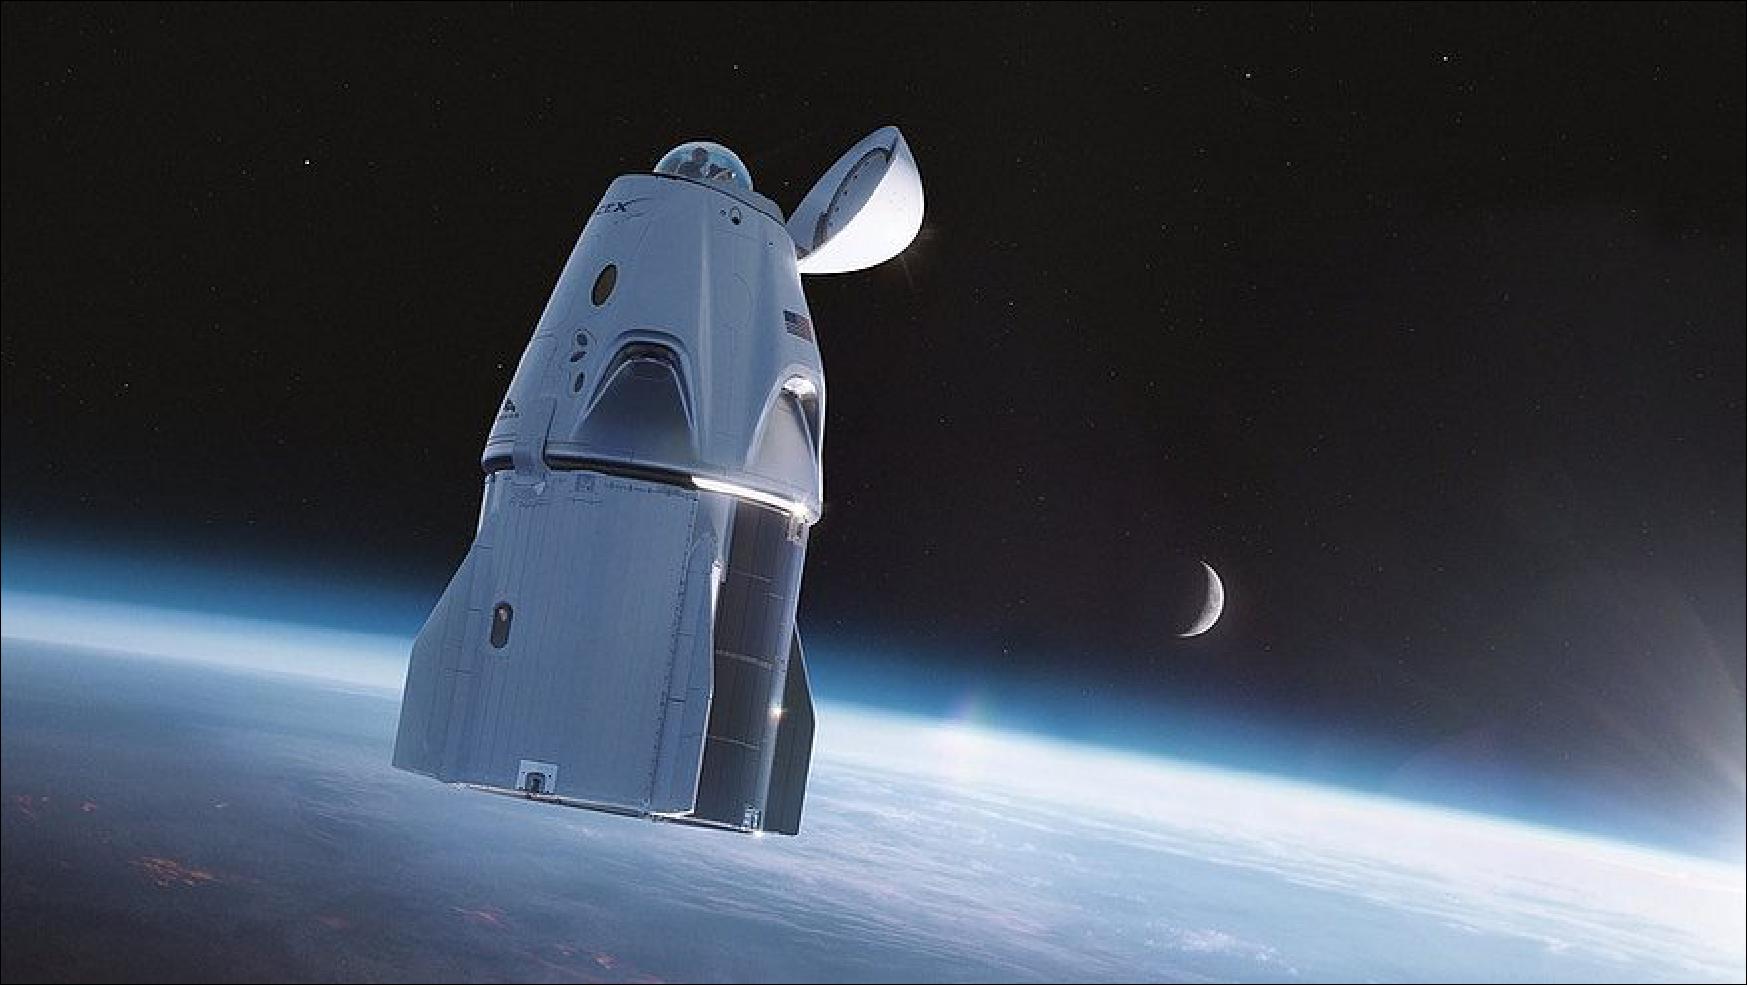 Figure 2: An illustration of the Crew Dragon spacecraft outfitted with a cupola in place of the docking adapter used for space station missions (image credit: SpaceX)